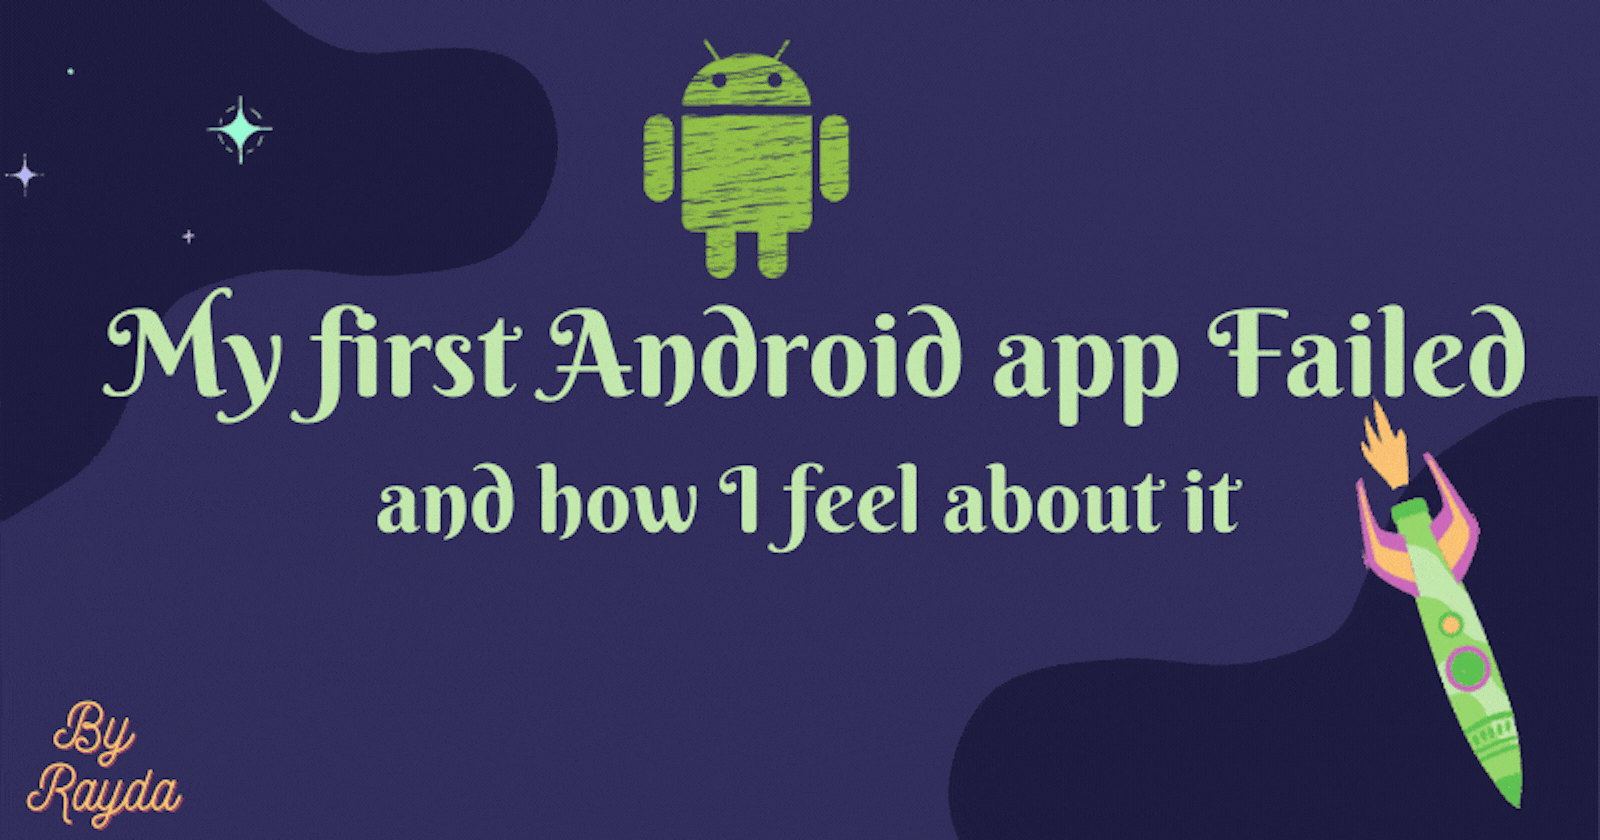 My first Android App failed and how I feel about it